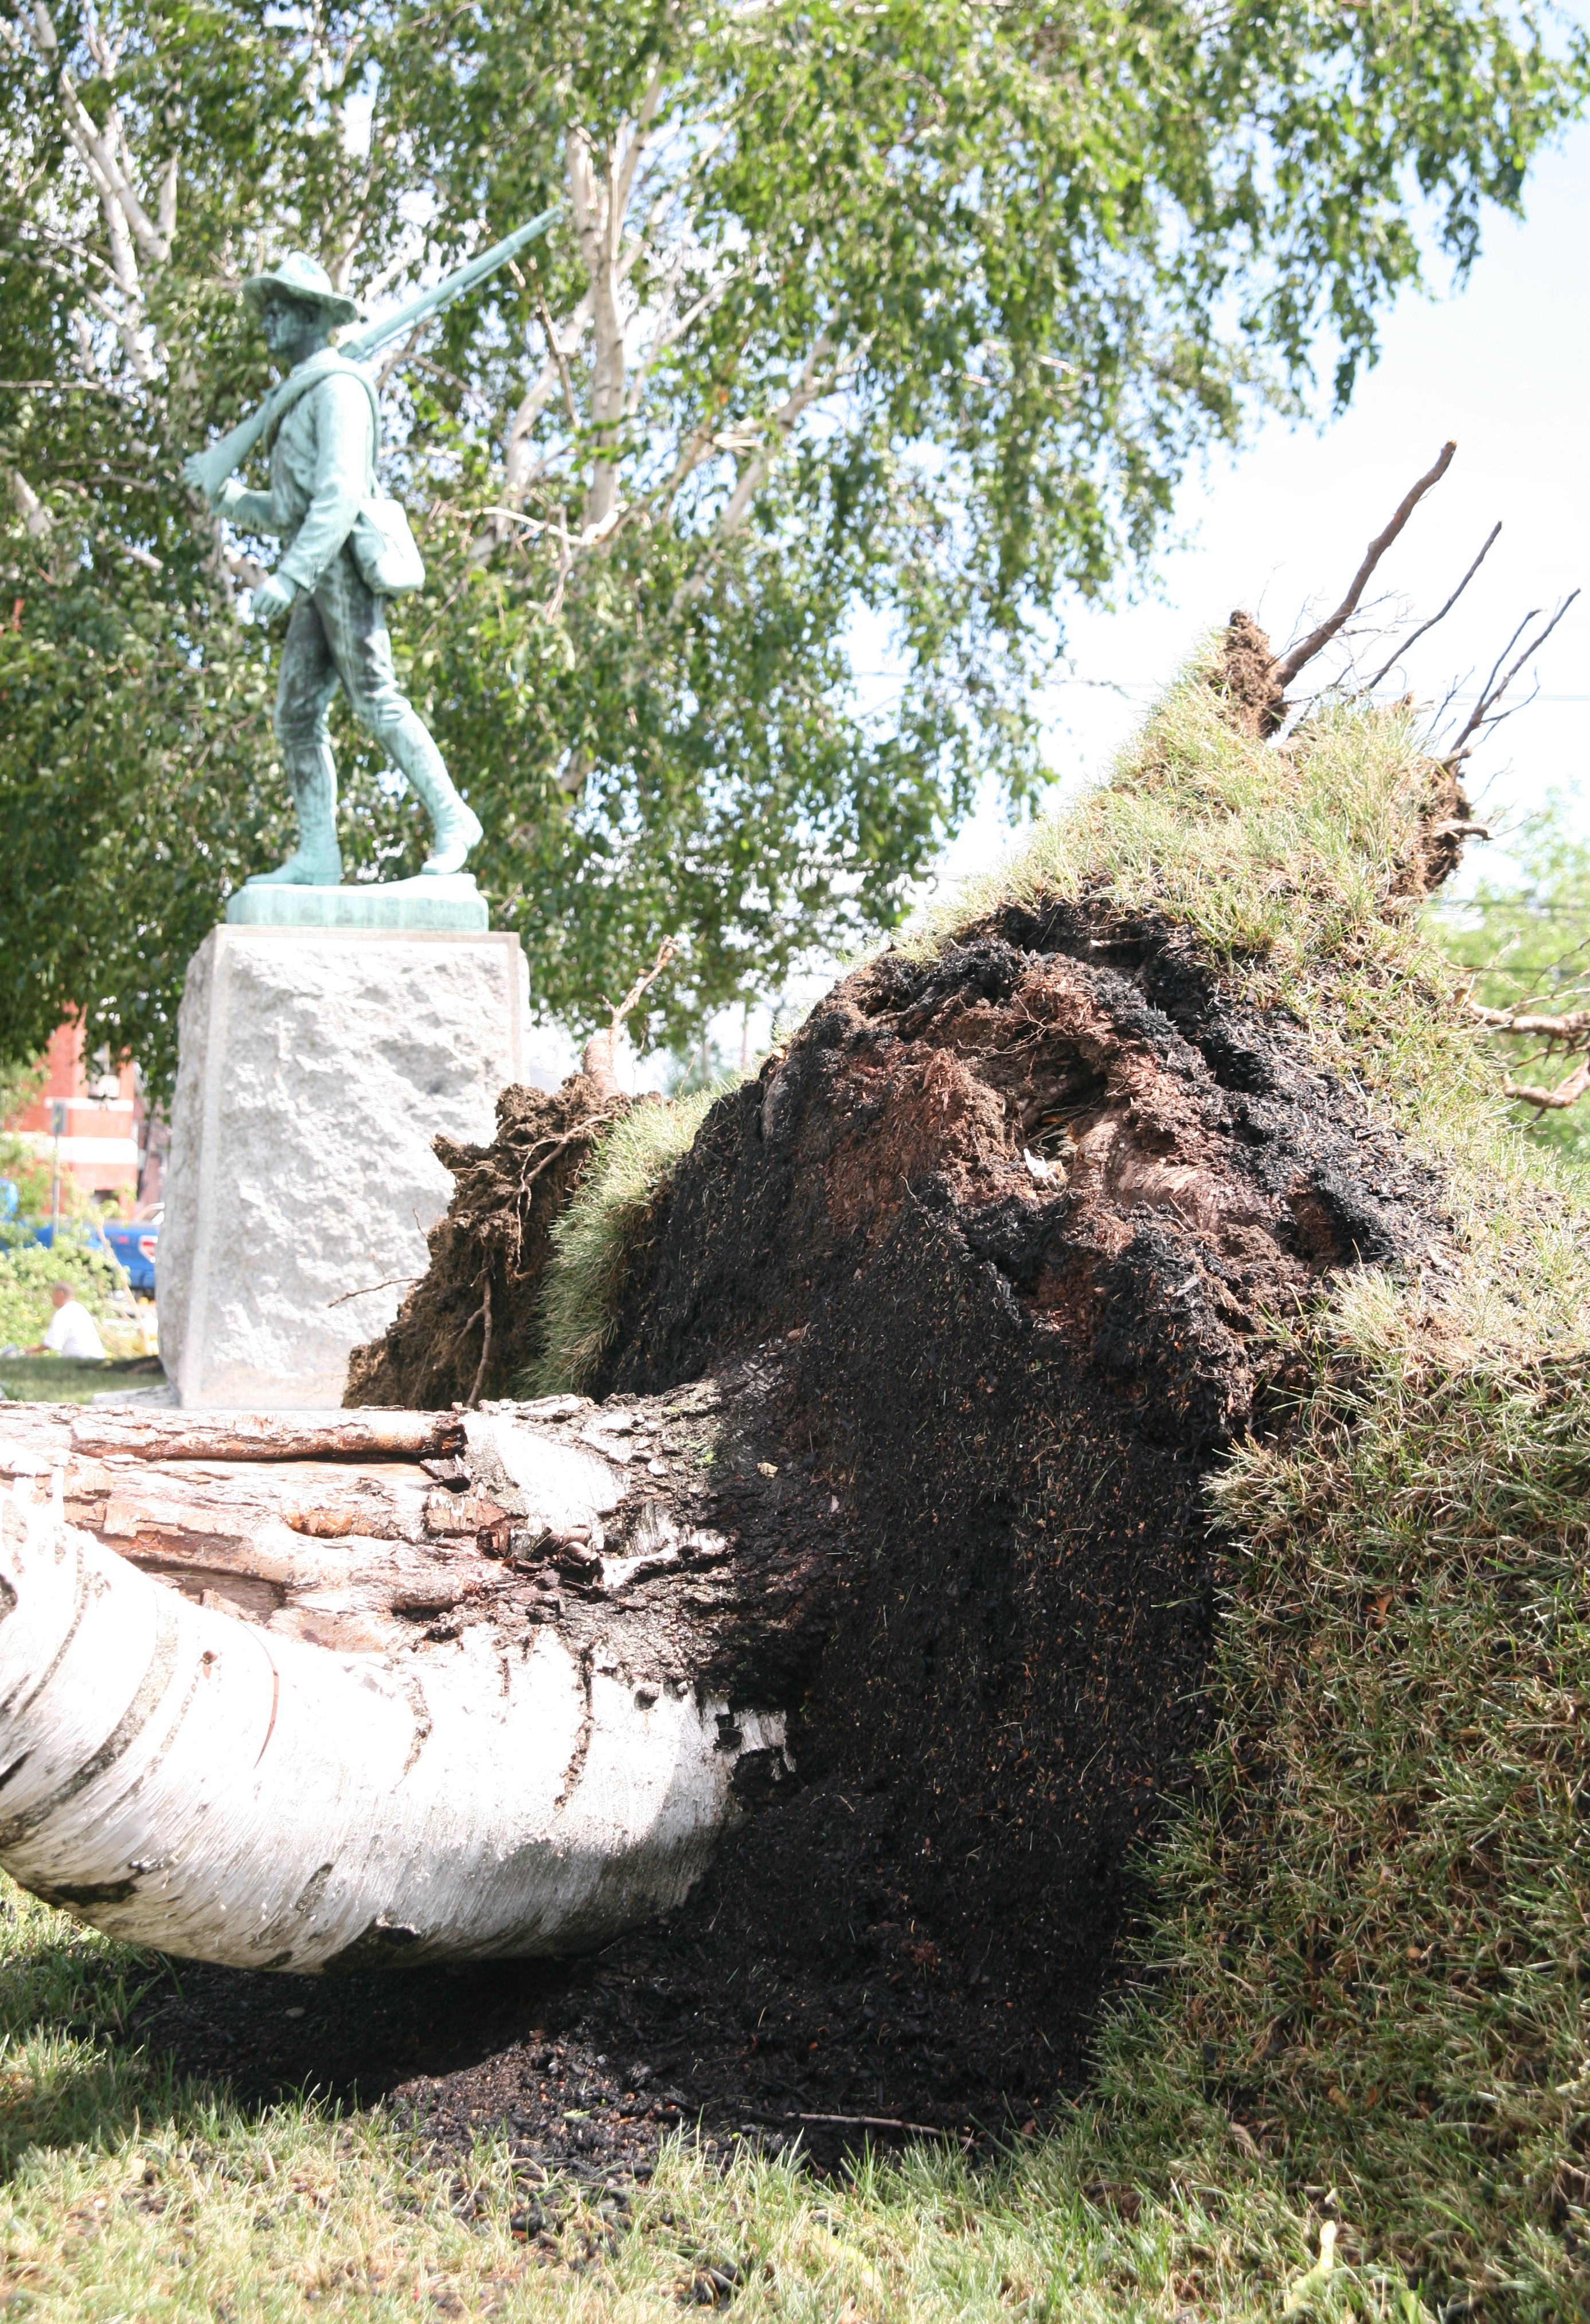 The huge, signature Beech trees on the American Legion Lawn were ripped out of the ground by the roots – changing the landscape of the treasured memorial garden forever.